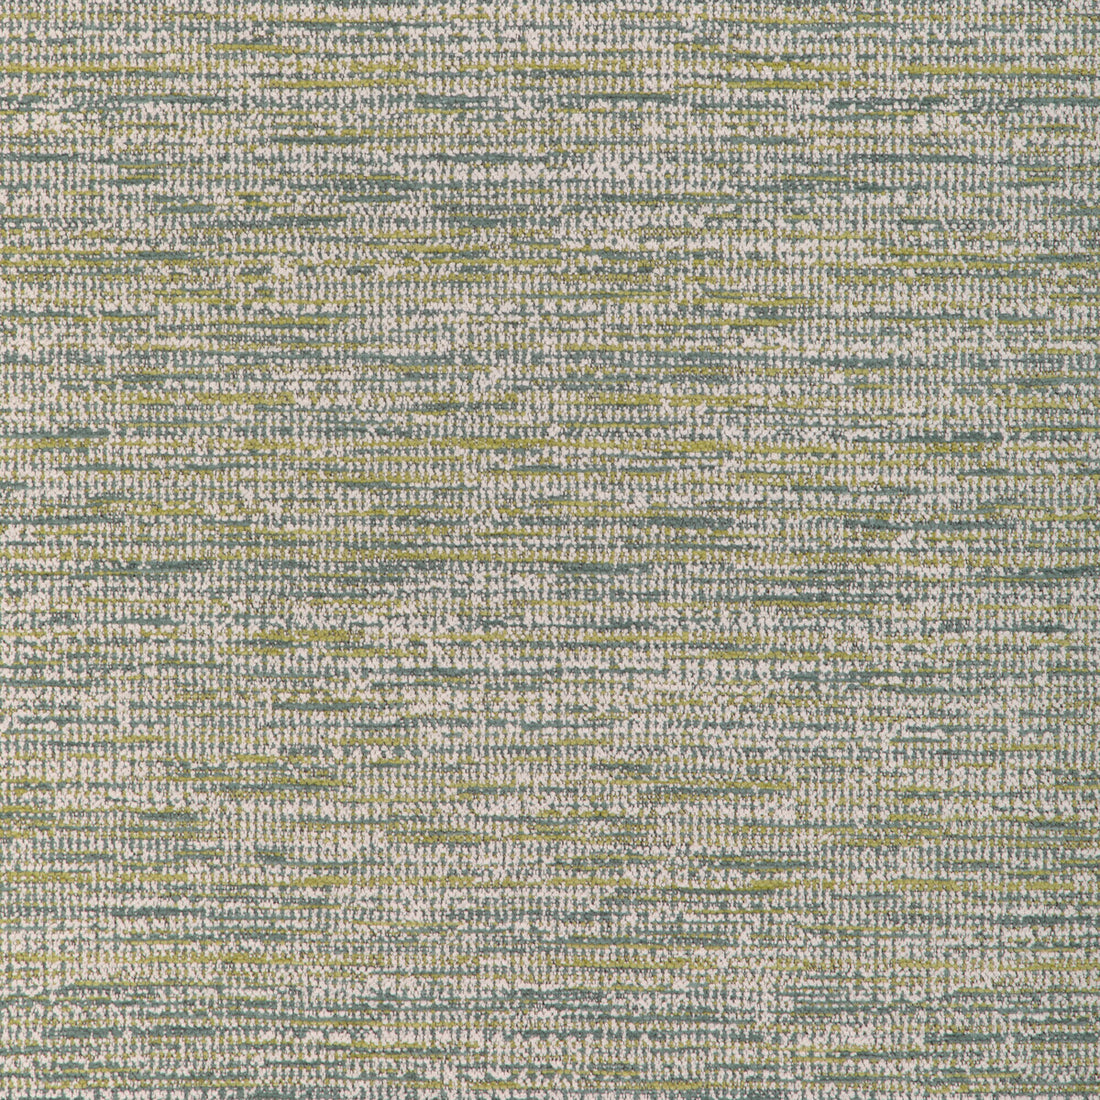 Kravet Design fabric in 37214-3 color - pattern 37214.3.0 - by Kravet Design in the Woven Colors collection